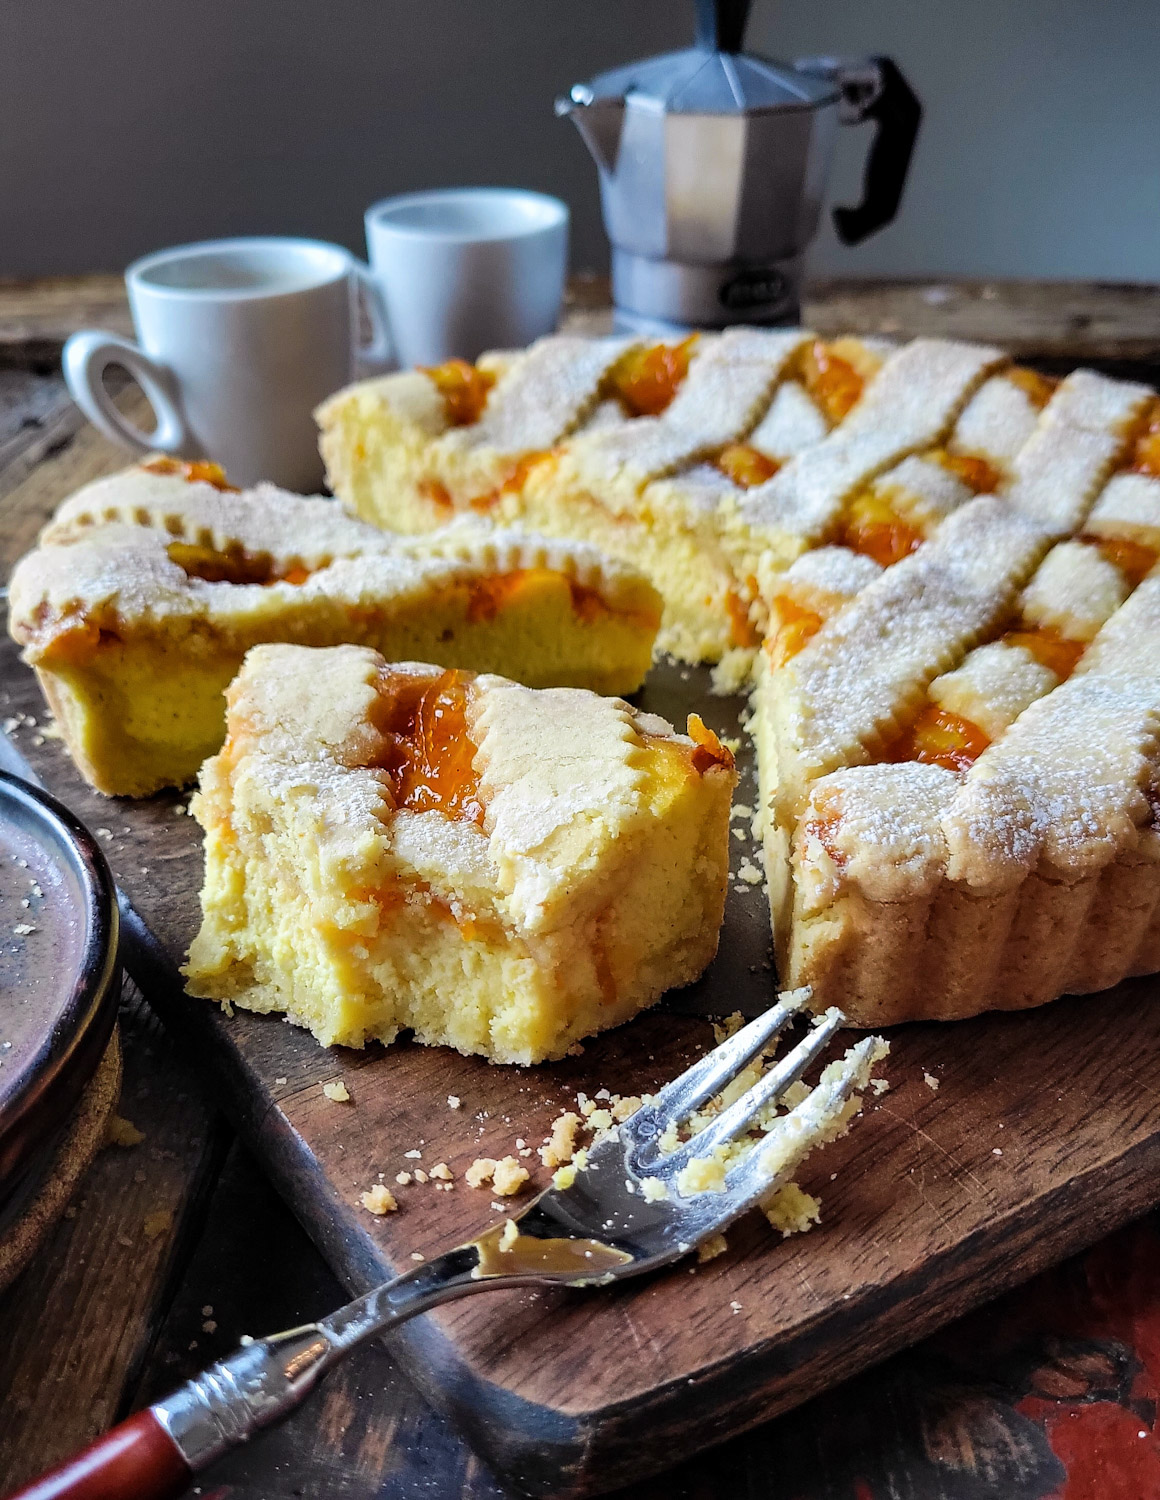 A Marmalade Ricotta Crostata sliced on a cutting board, ready to eat, with coffee in the background